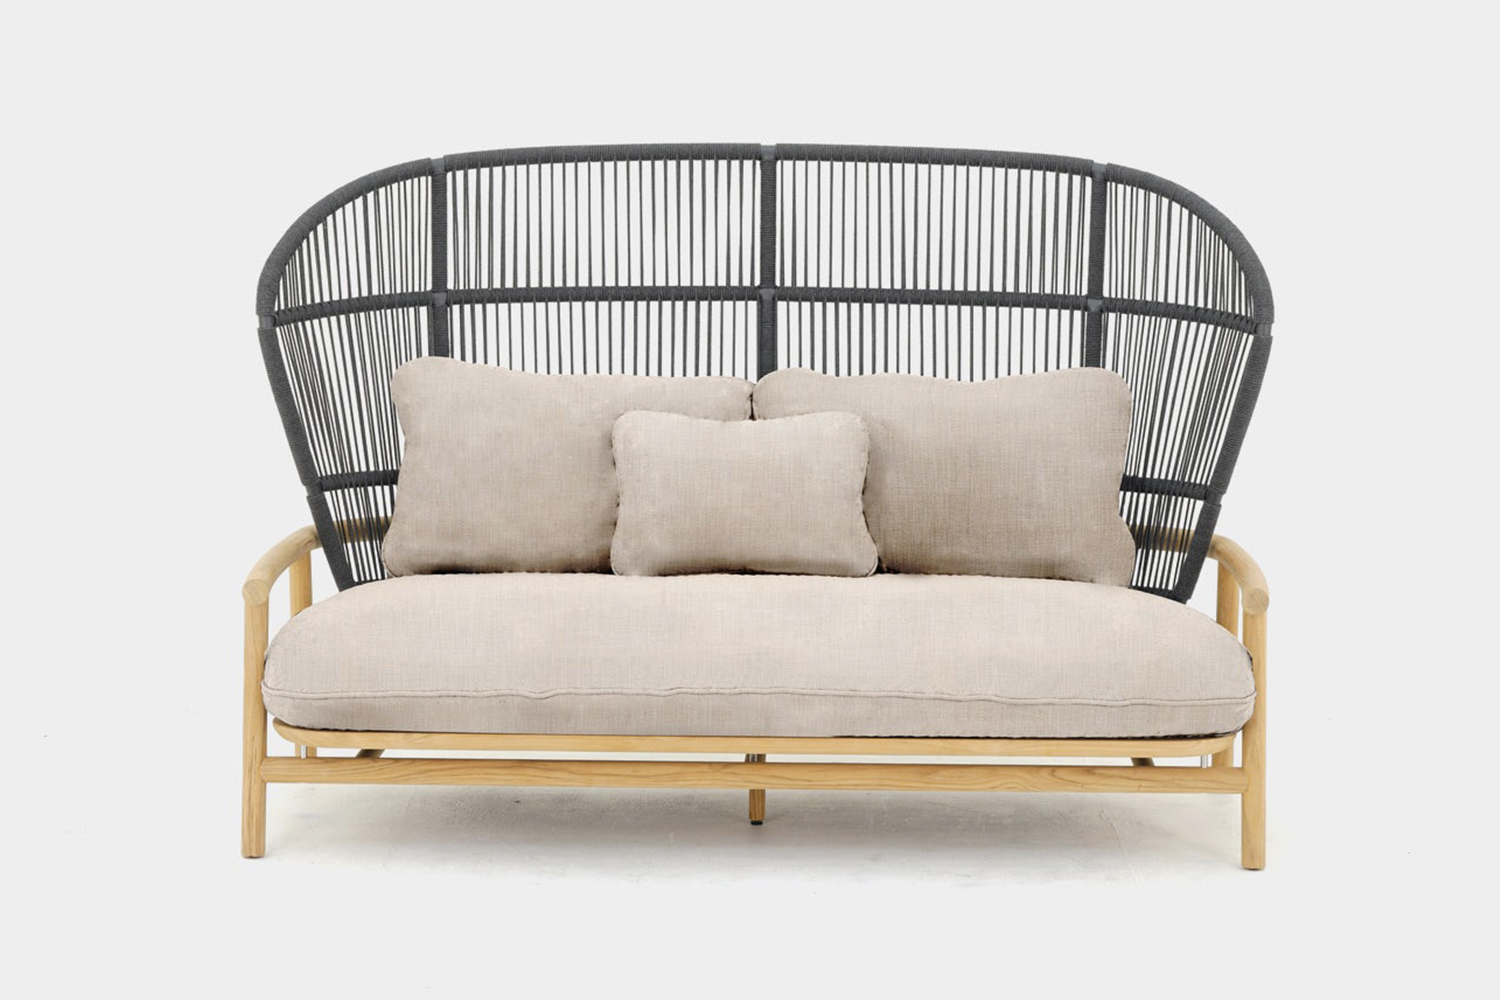 Fern Sofa from Design Within Reach